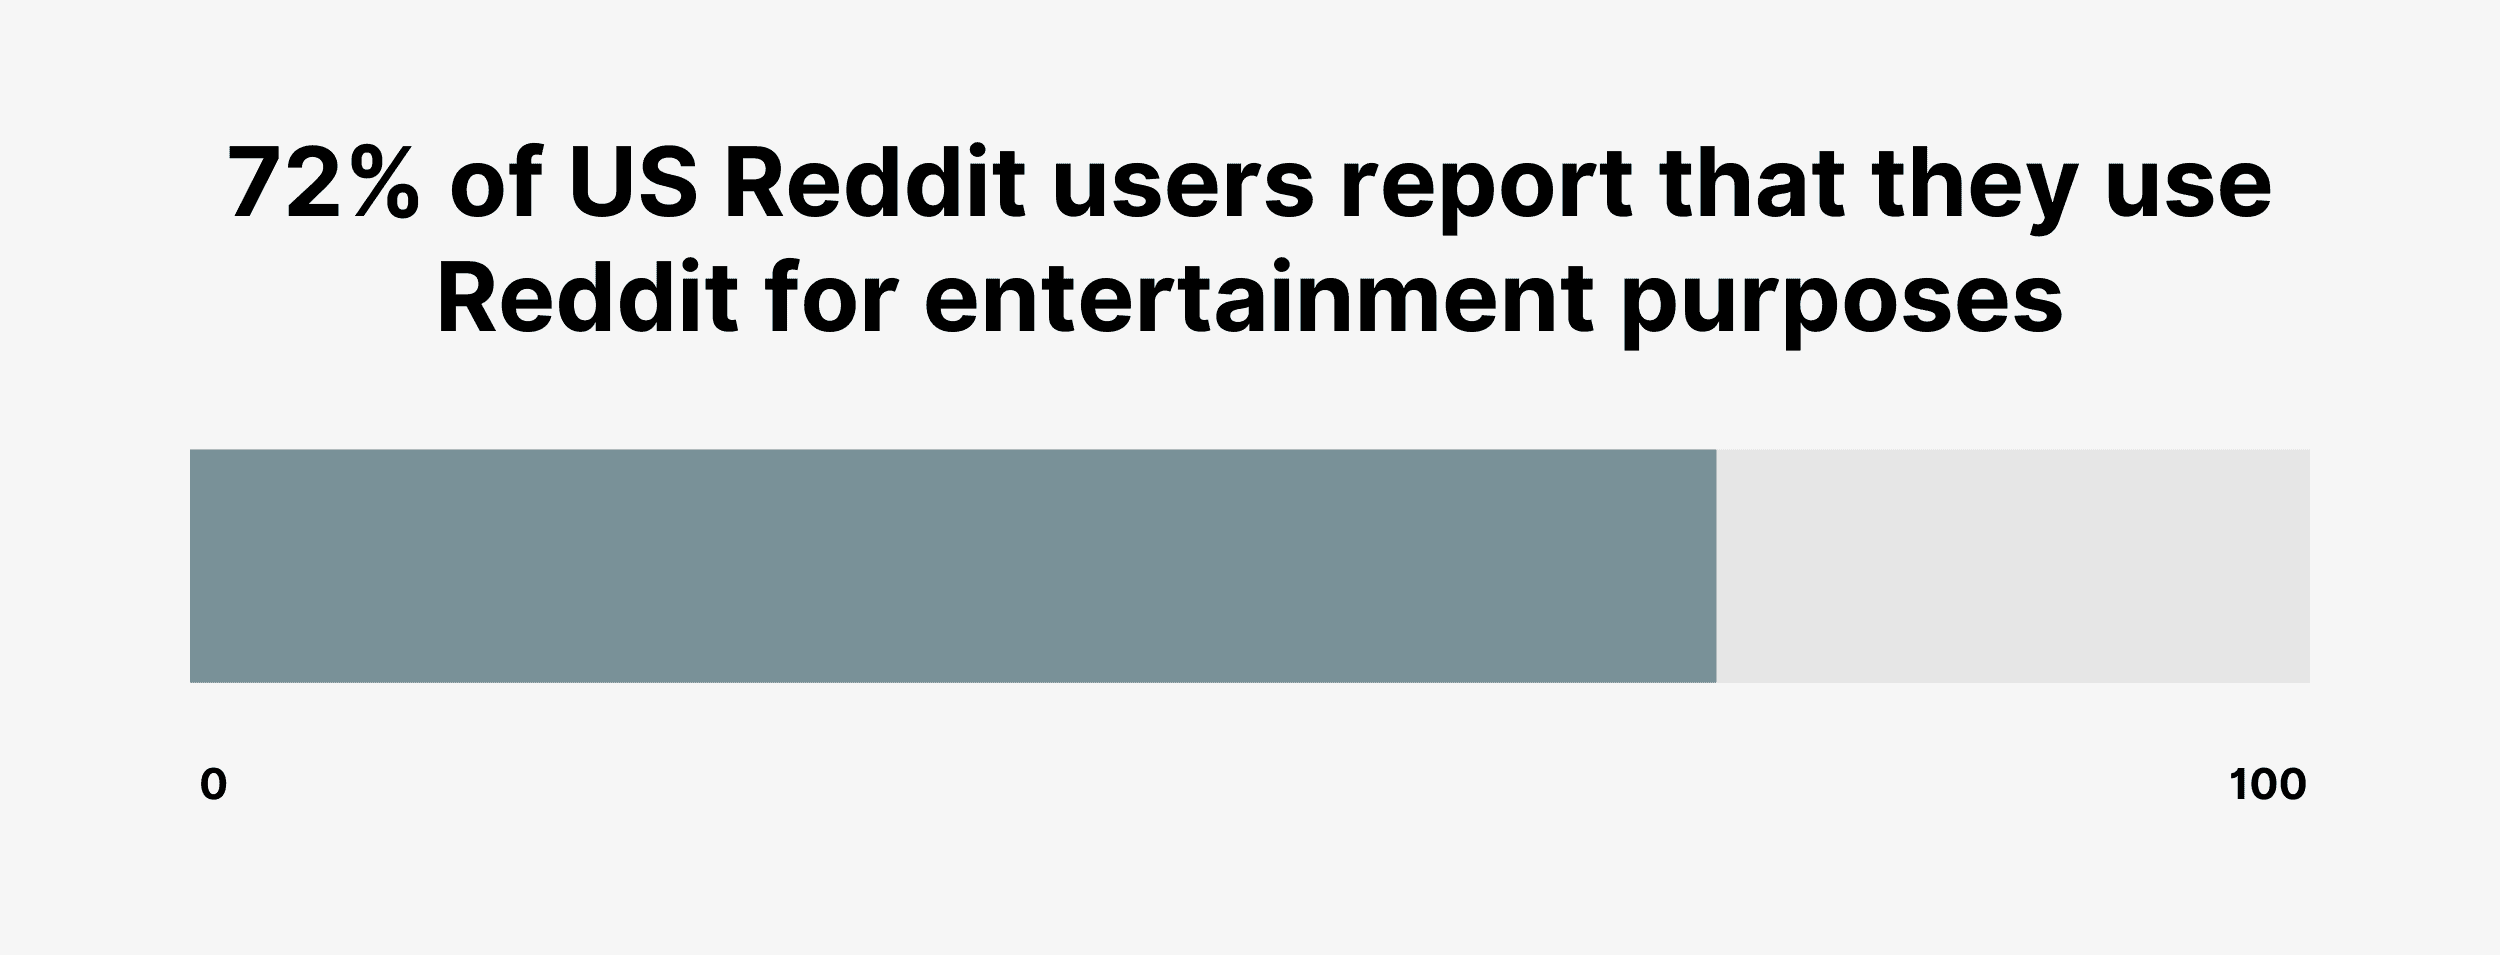 72% of US Reddit users report that they use Reddit for entertainment purposes